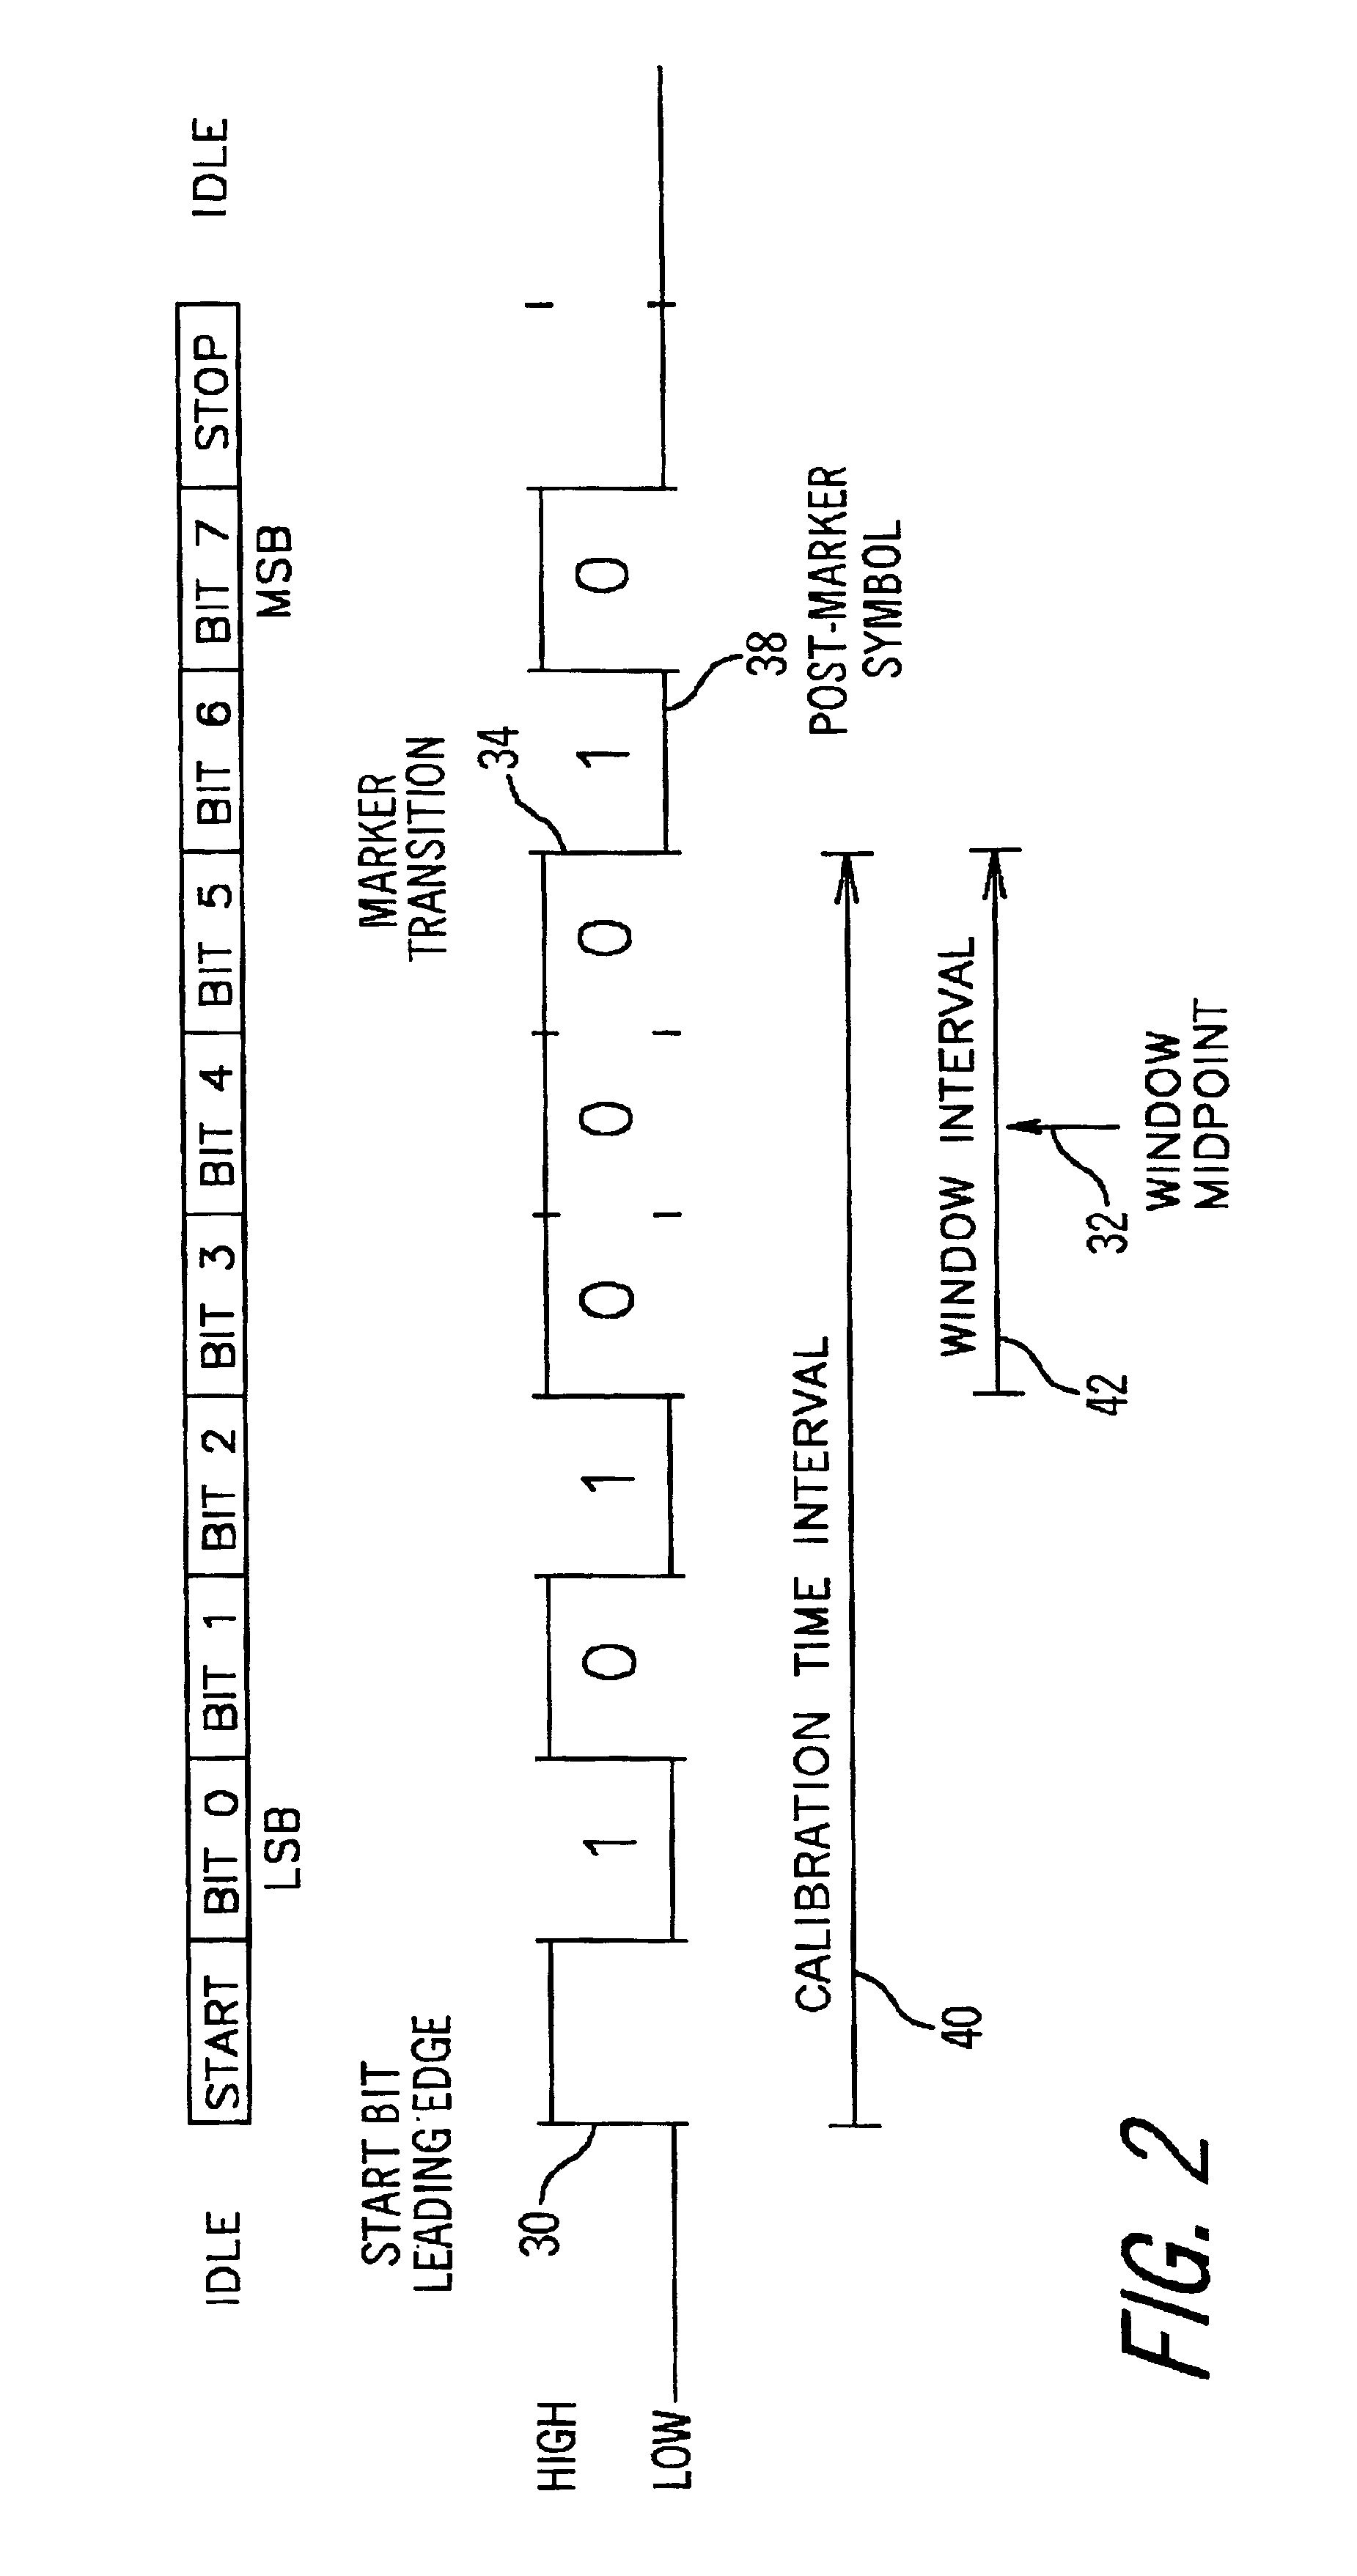 Data rate calibration for asynchronous serial communications